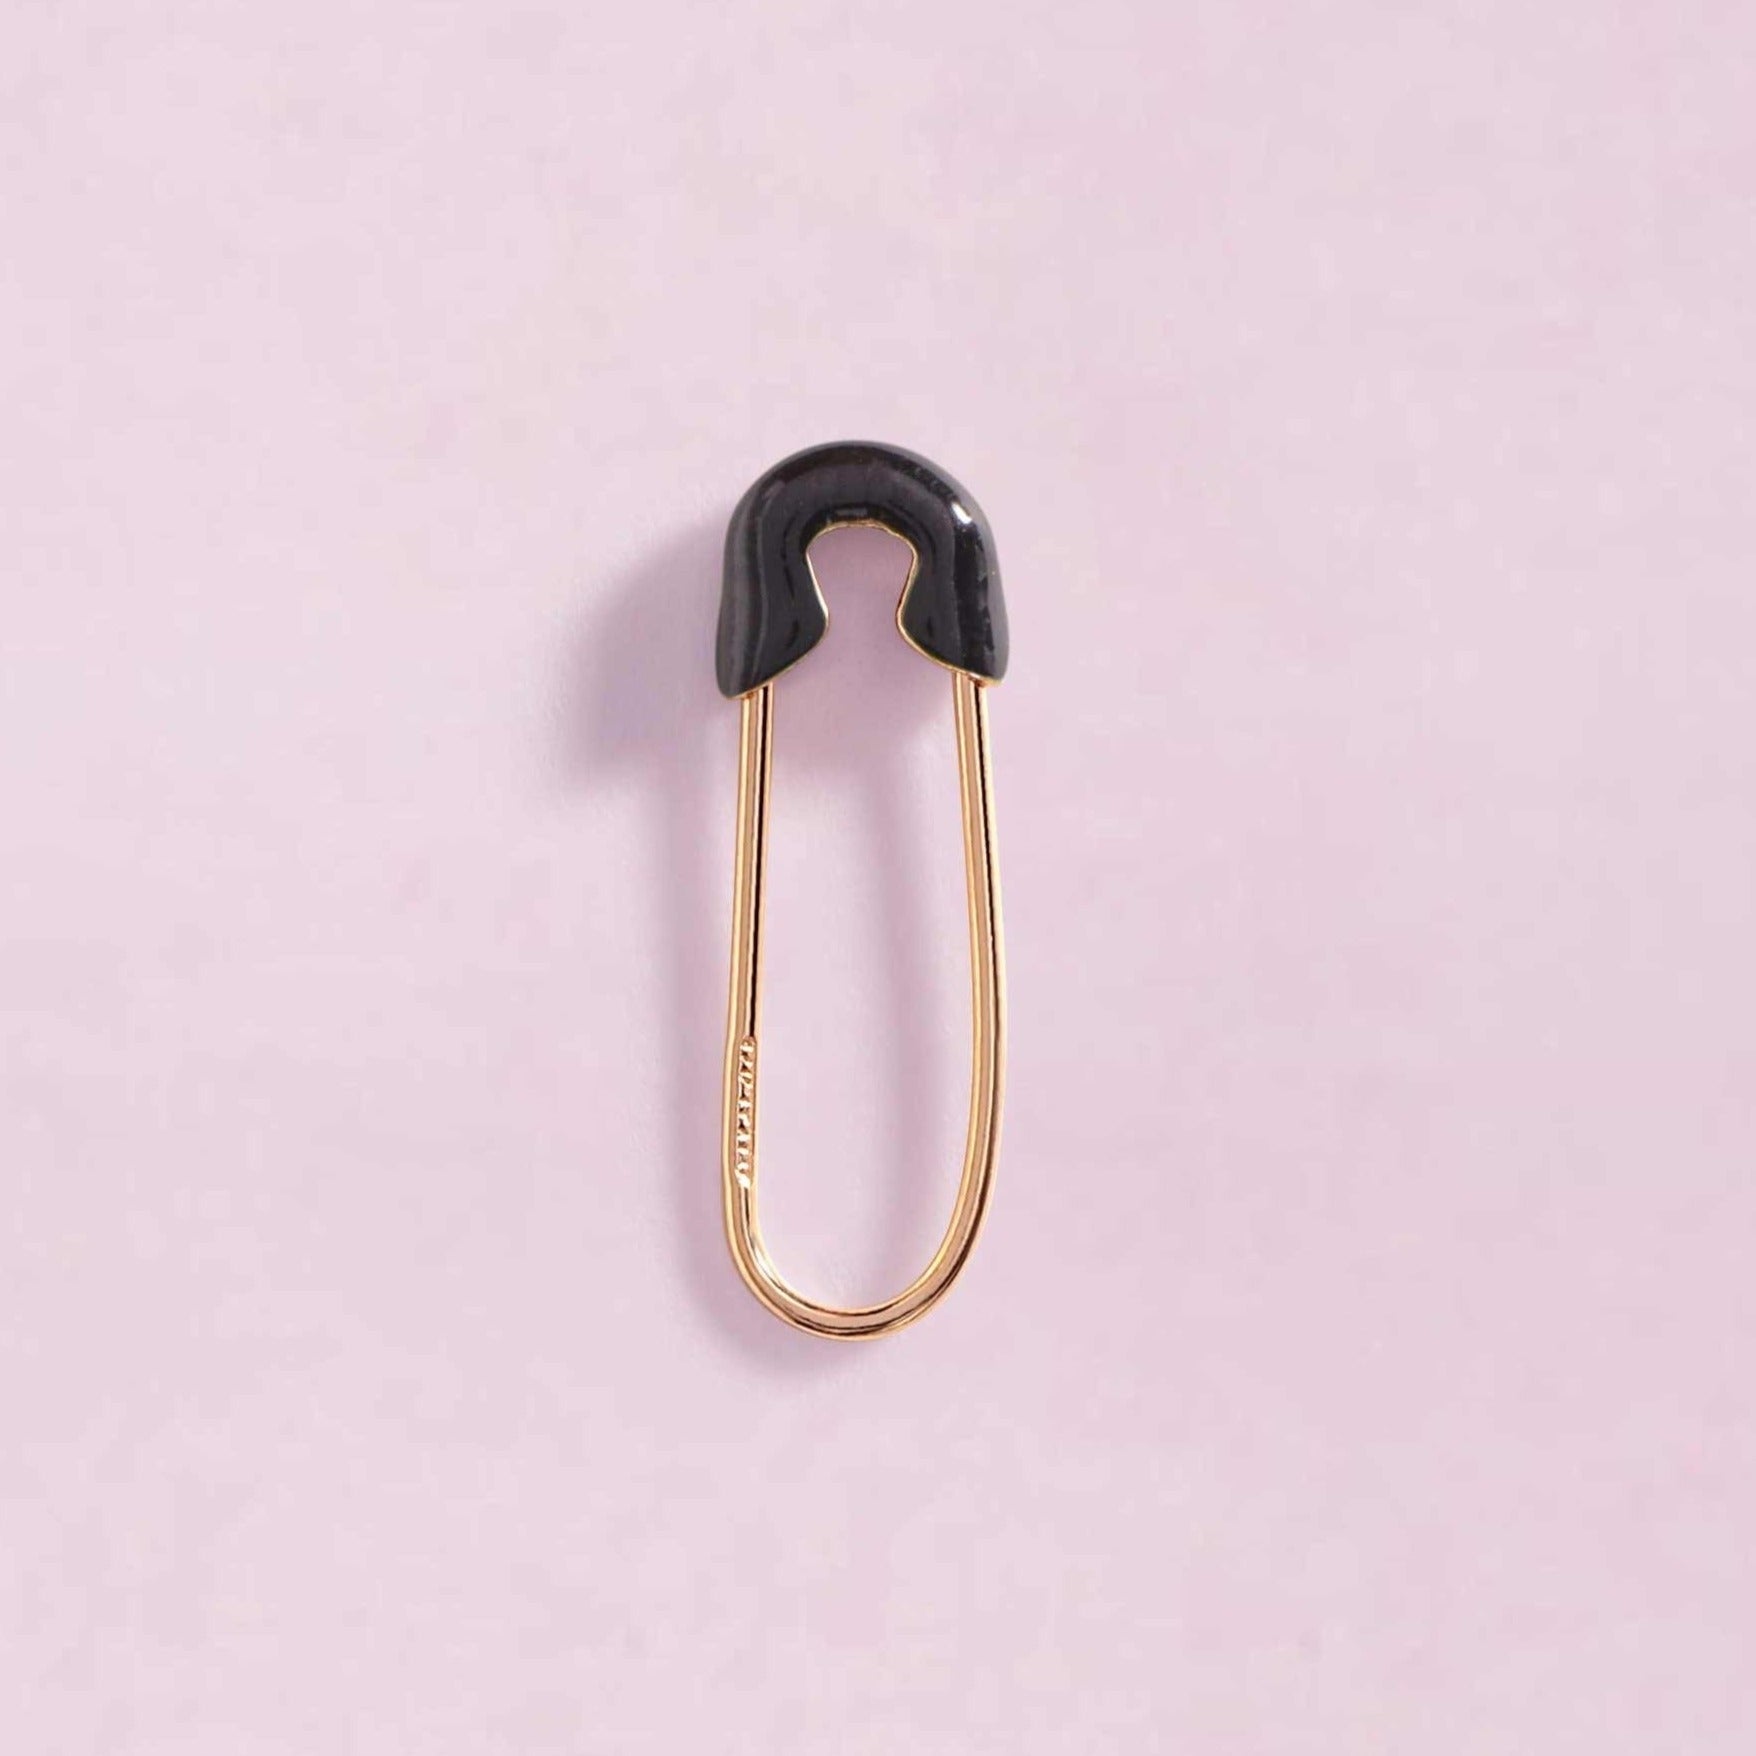 Buy Nelly Safety Pin Earring - Silver | Nelly.com